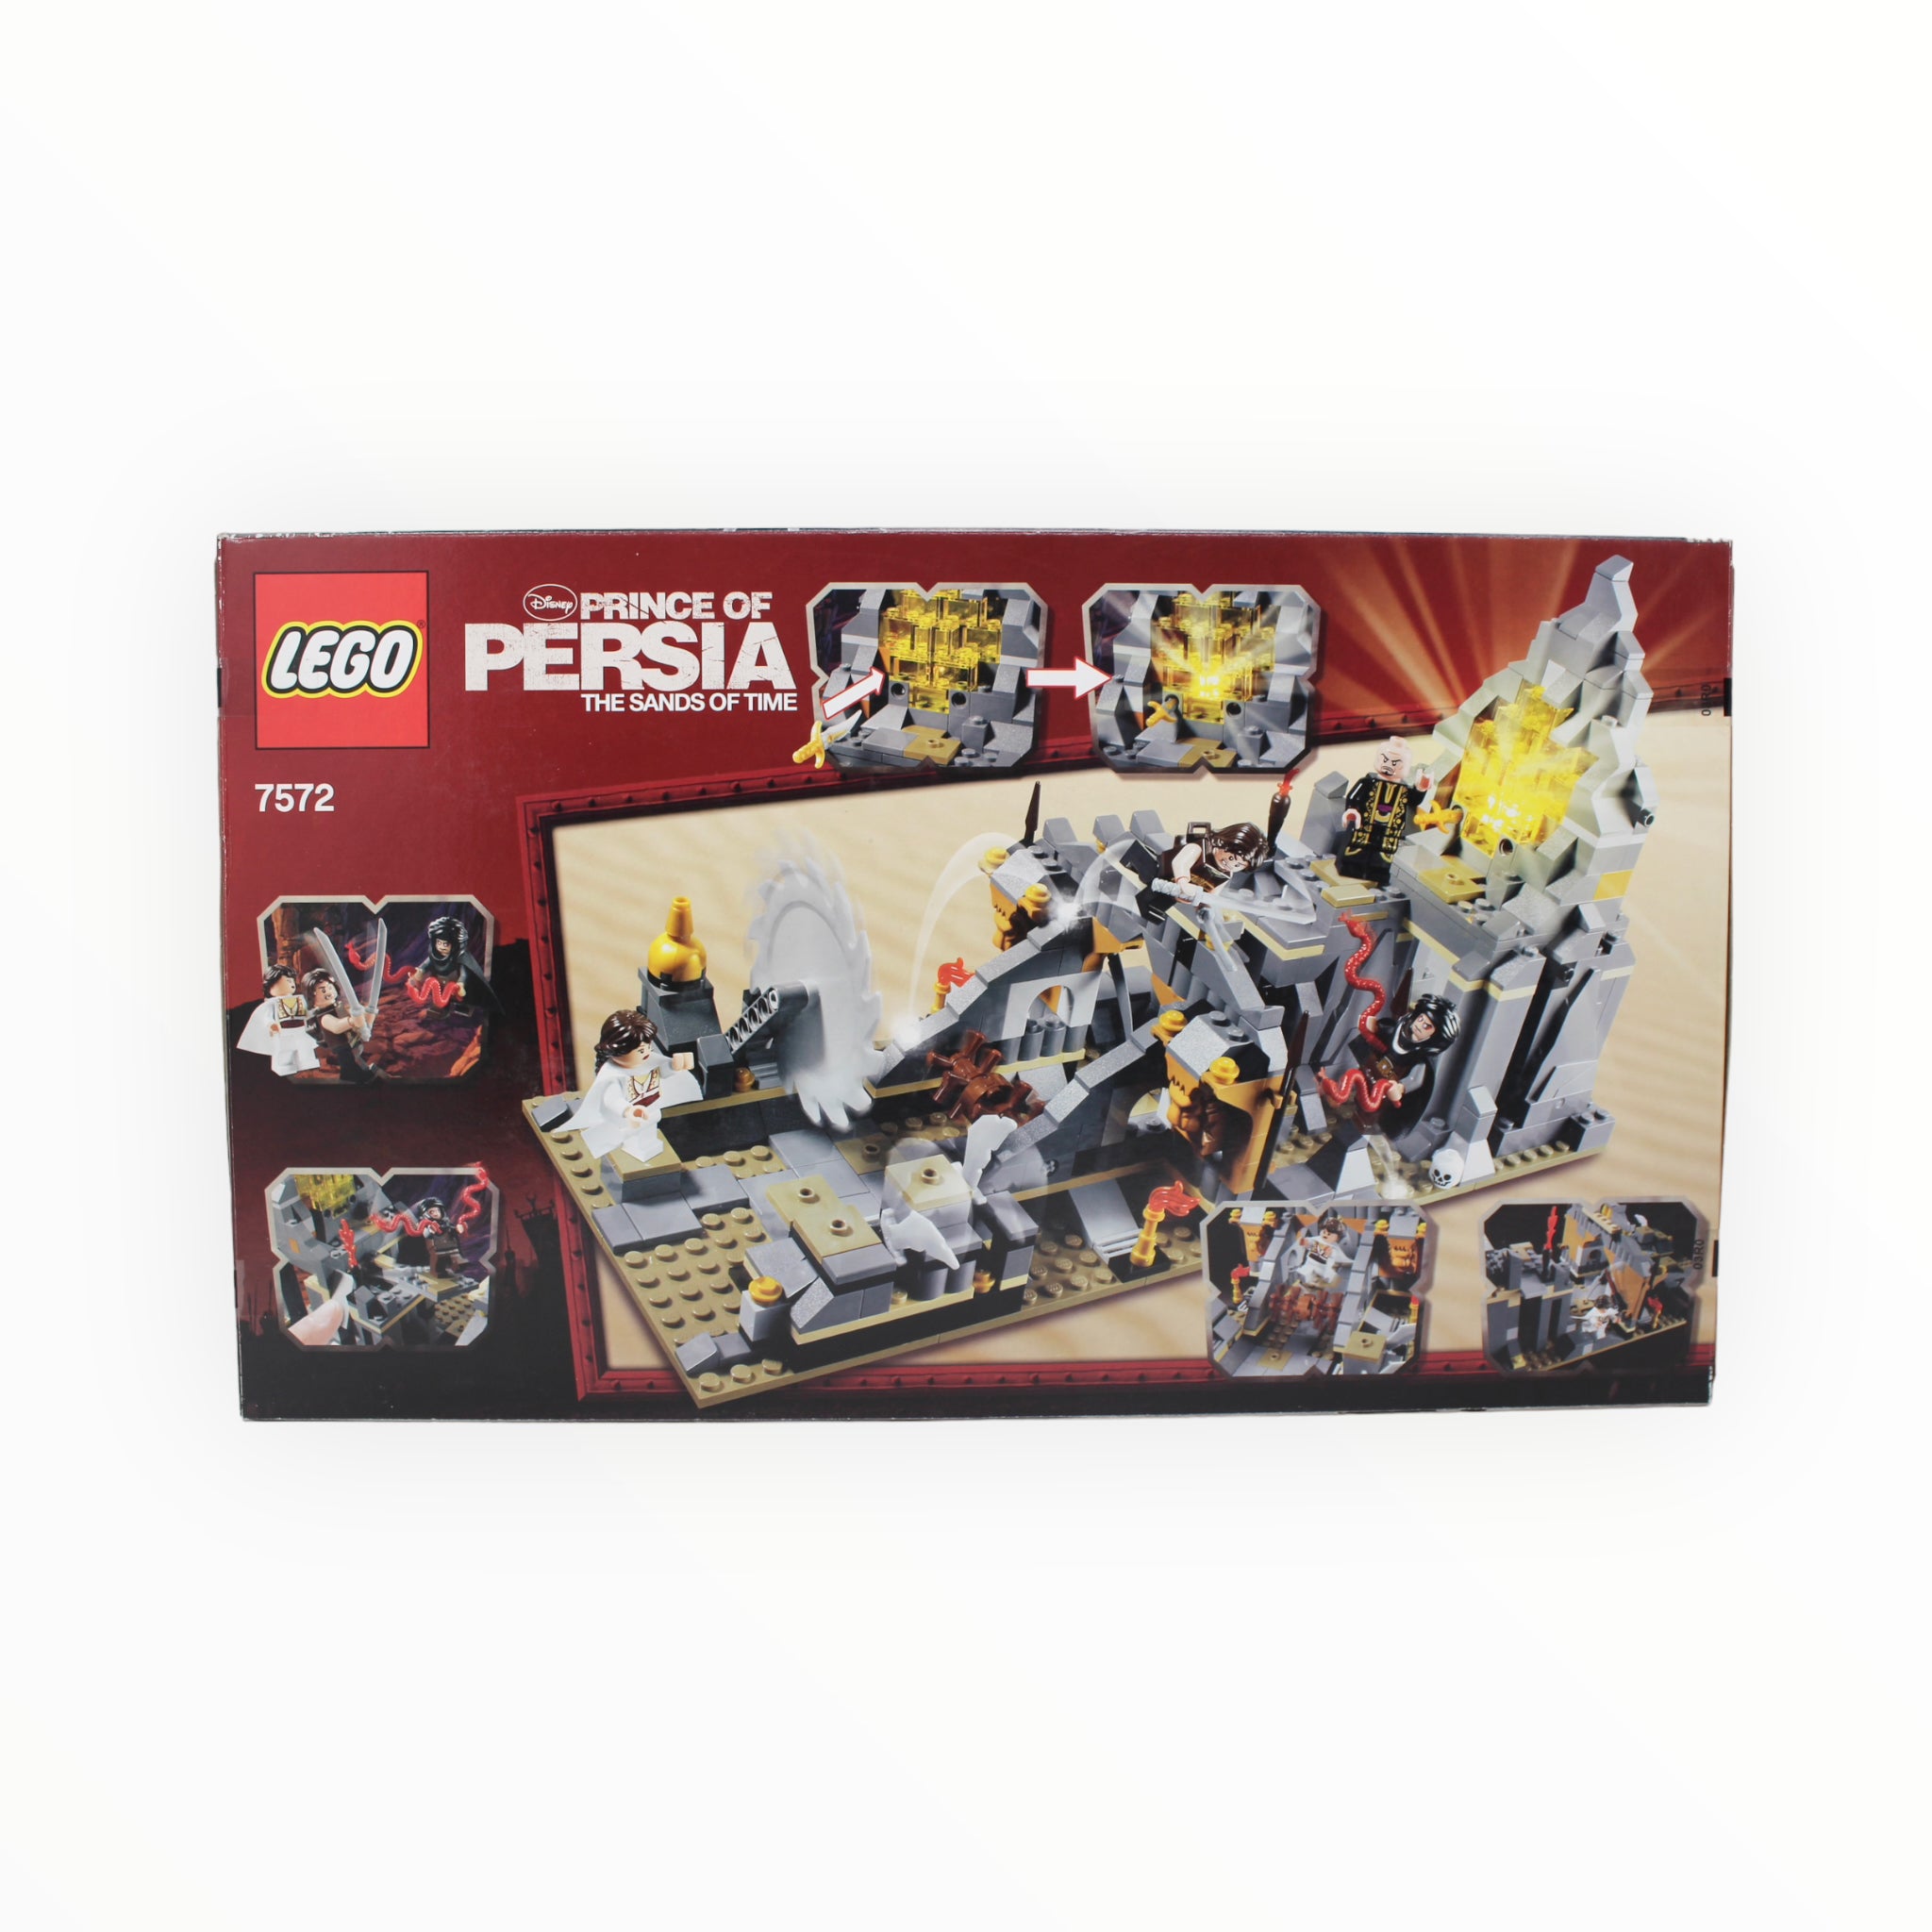 Retired Set 7572 of Persia Quest